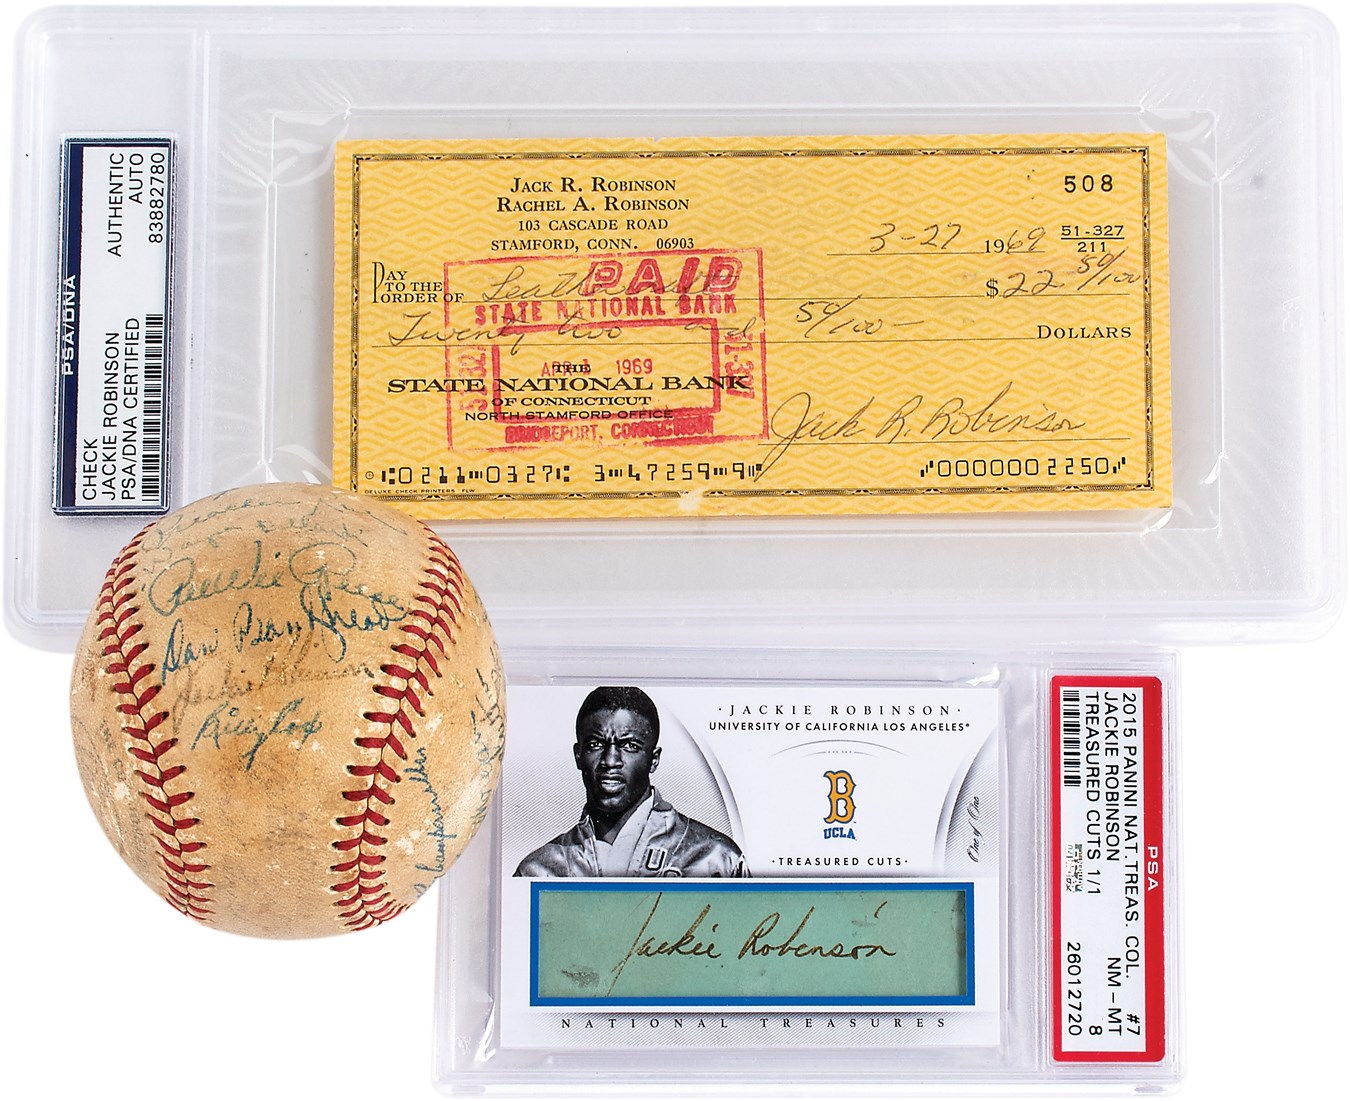 2015 National Treasures Jackie Robinson 1/1 Autograph Card, Signed Check & 1950 Brooklyn Dodgers Team Ball (3)